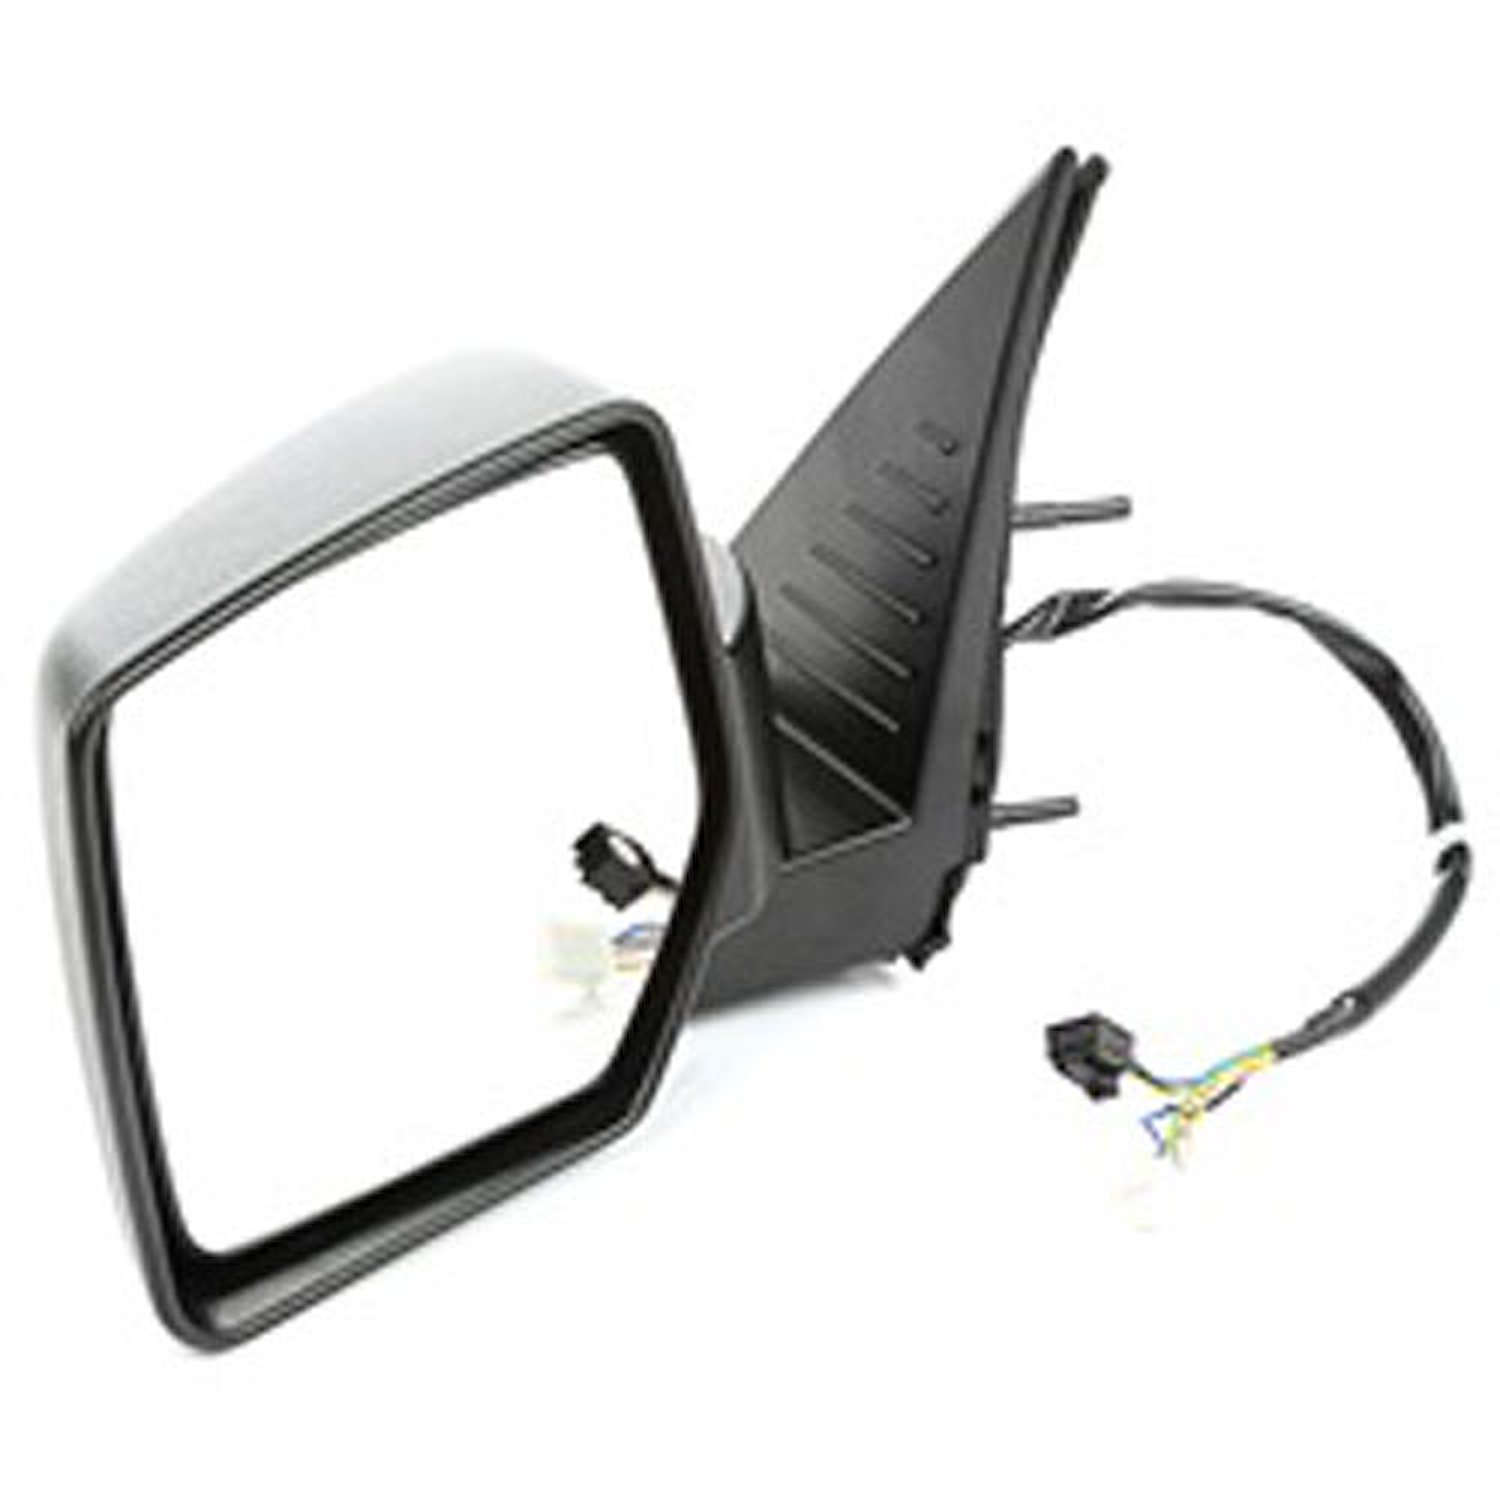 This black left side mirror from Omix-ADA fits 08-12 Jeep Liberty. It is a power heated folding mirror with memory.